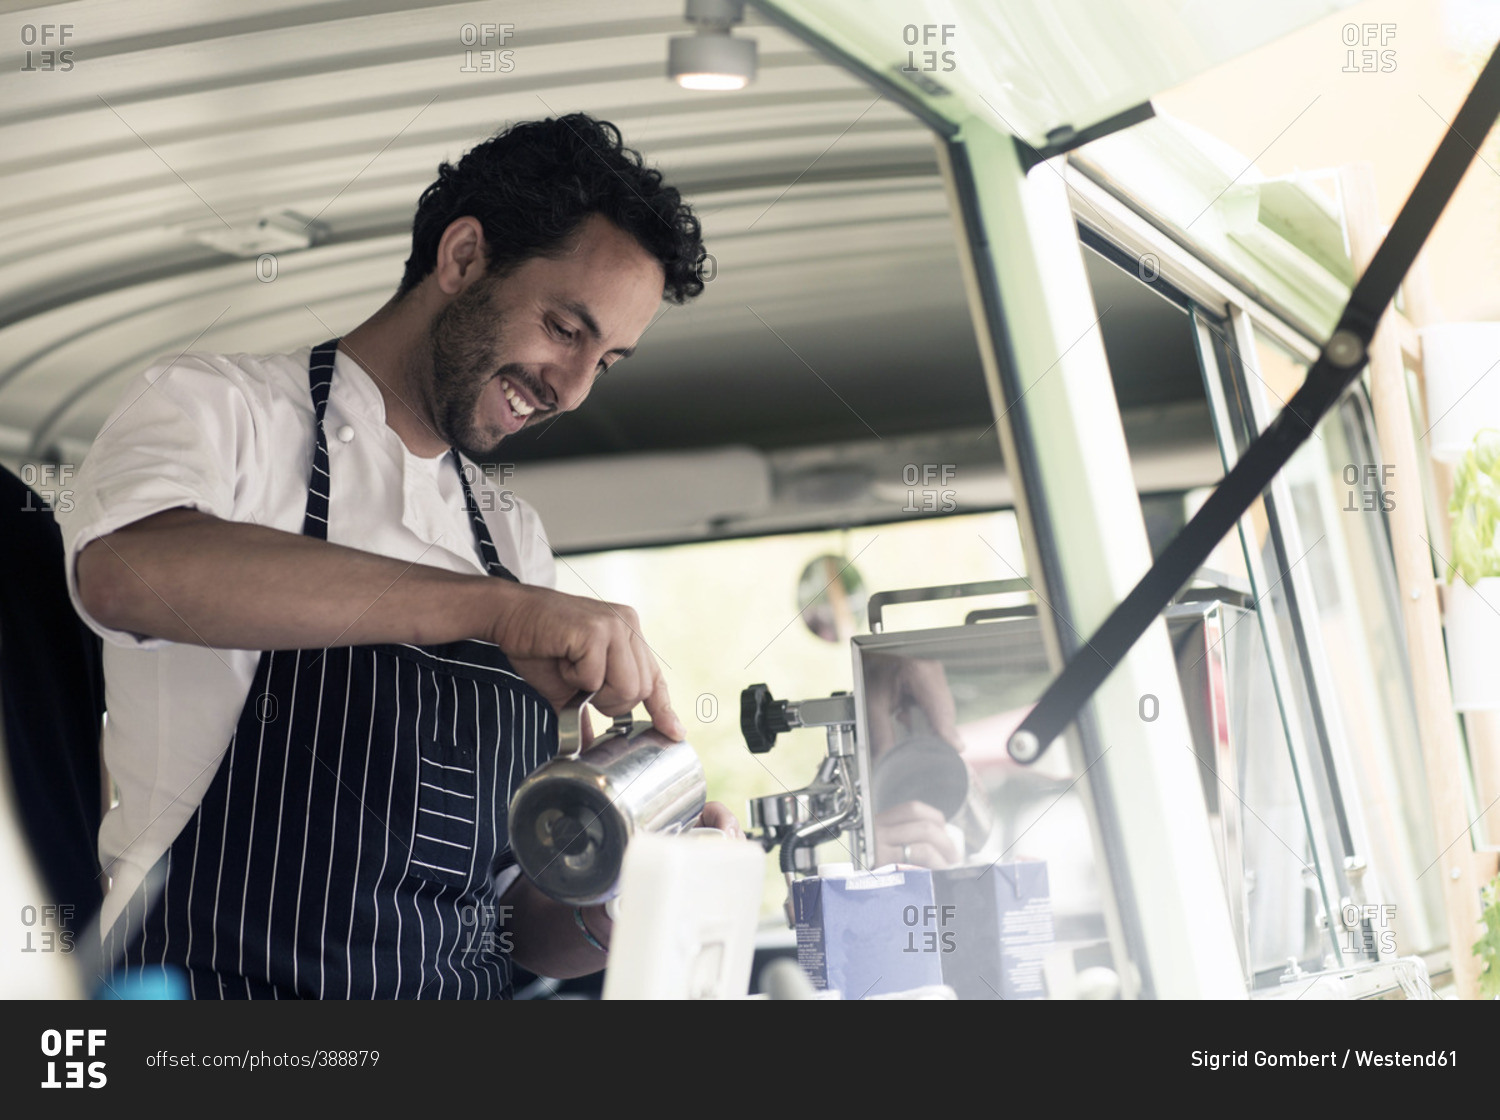 Smiling man working in a food truck